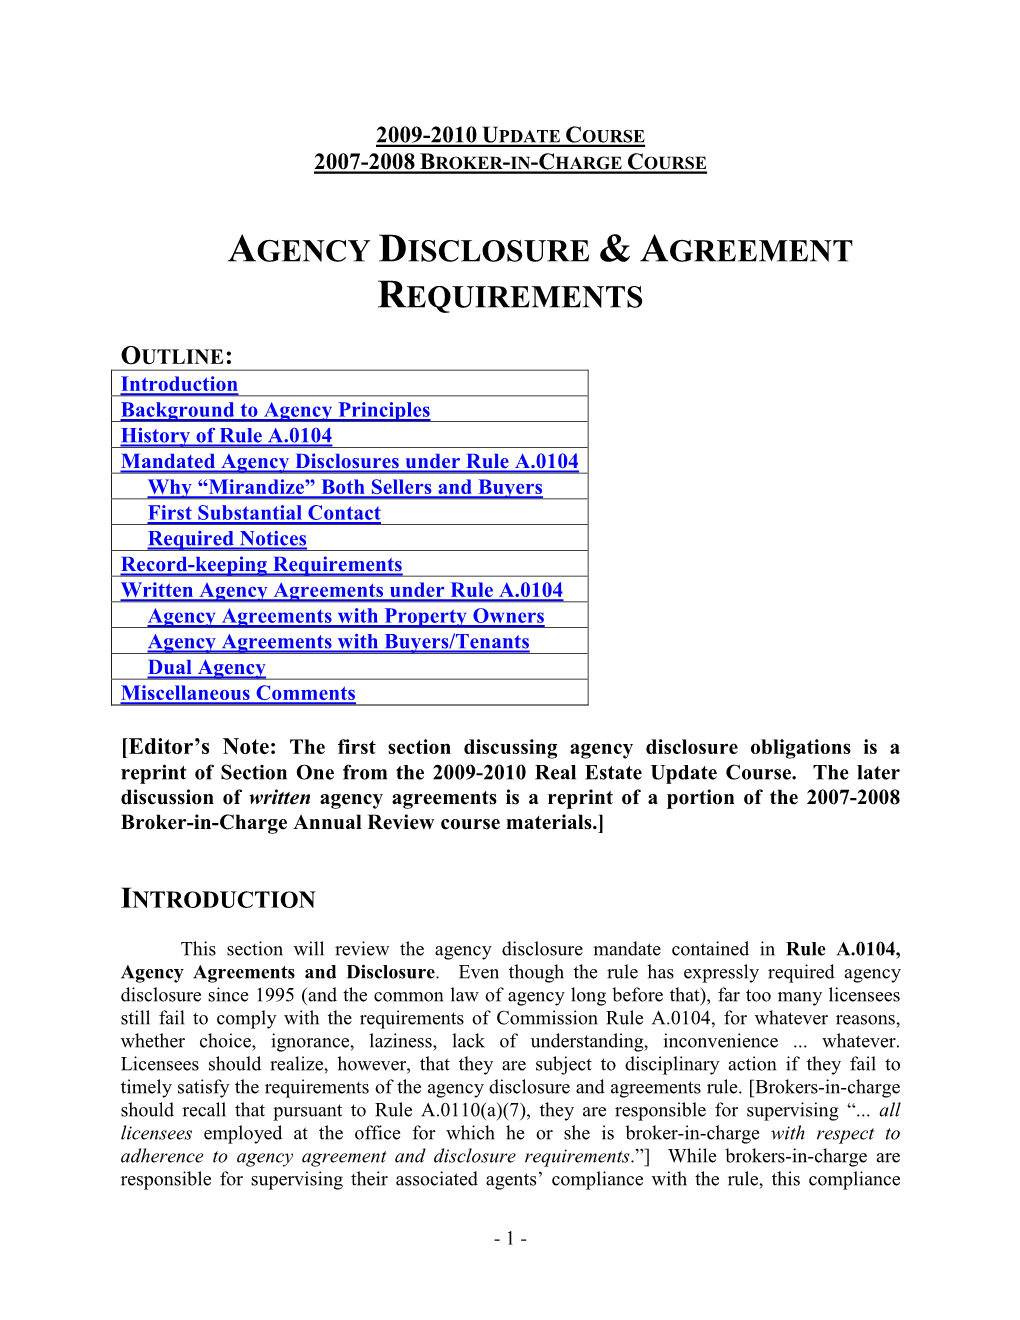 Agency Disclosure & Agreement Requirements